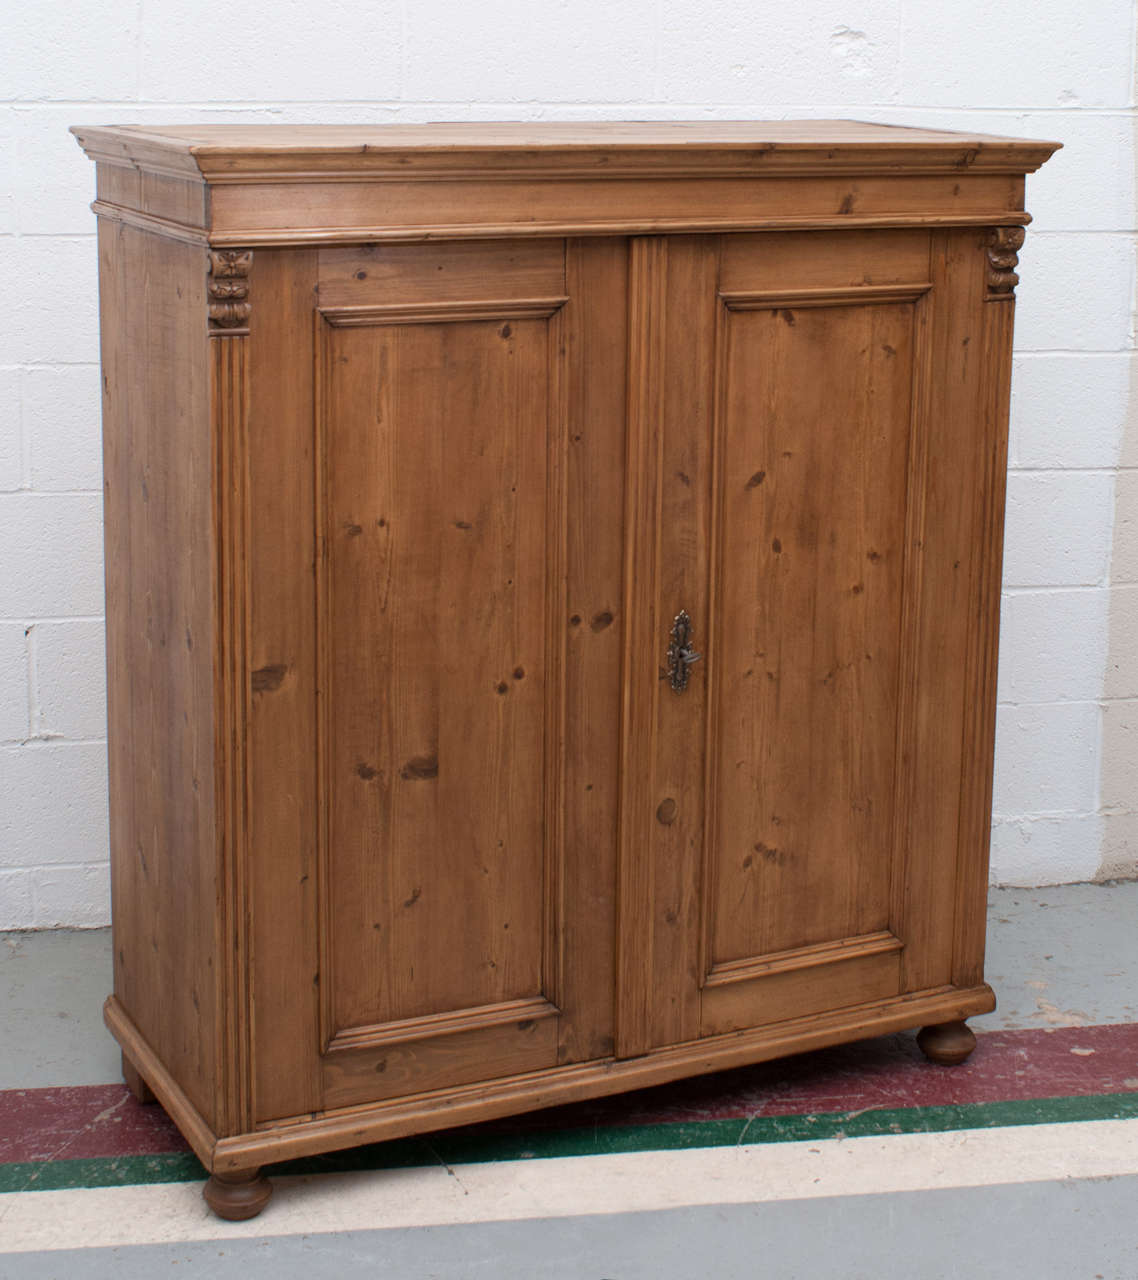 A handsome pine side cupboard with two paneled doors, fluting to the front sides and handsome carved corbels.  Exposed dovetails on the top and two replaced interior shelves.